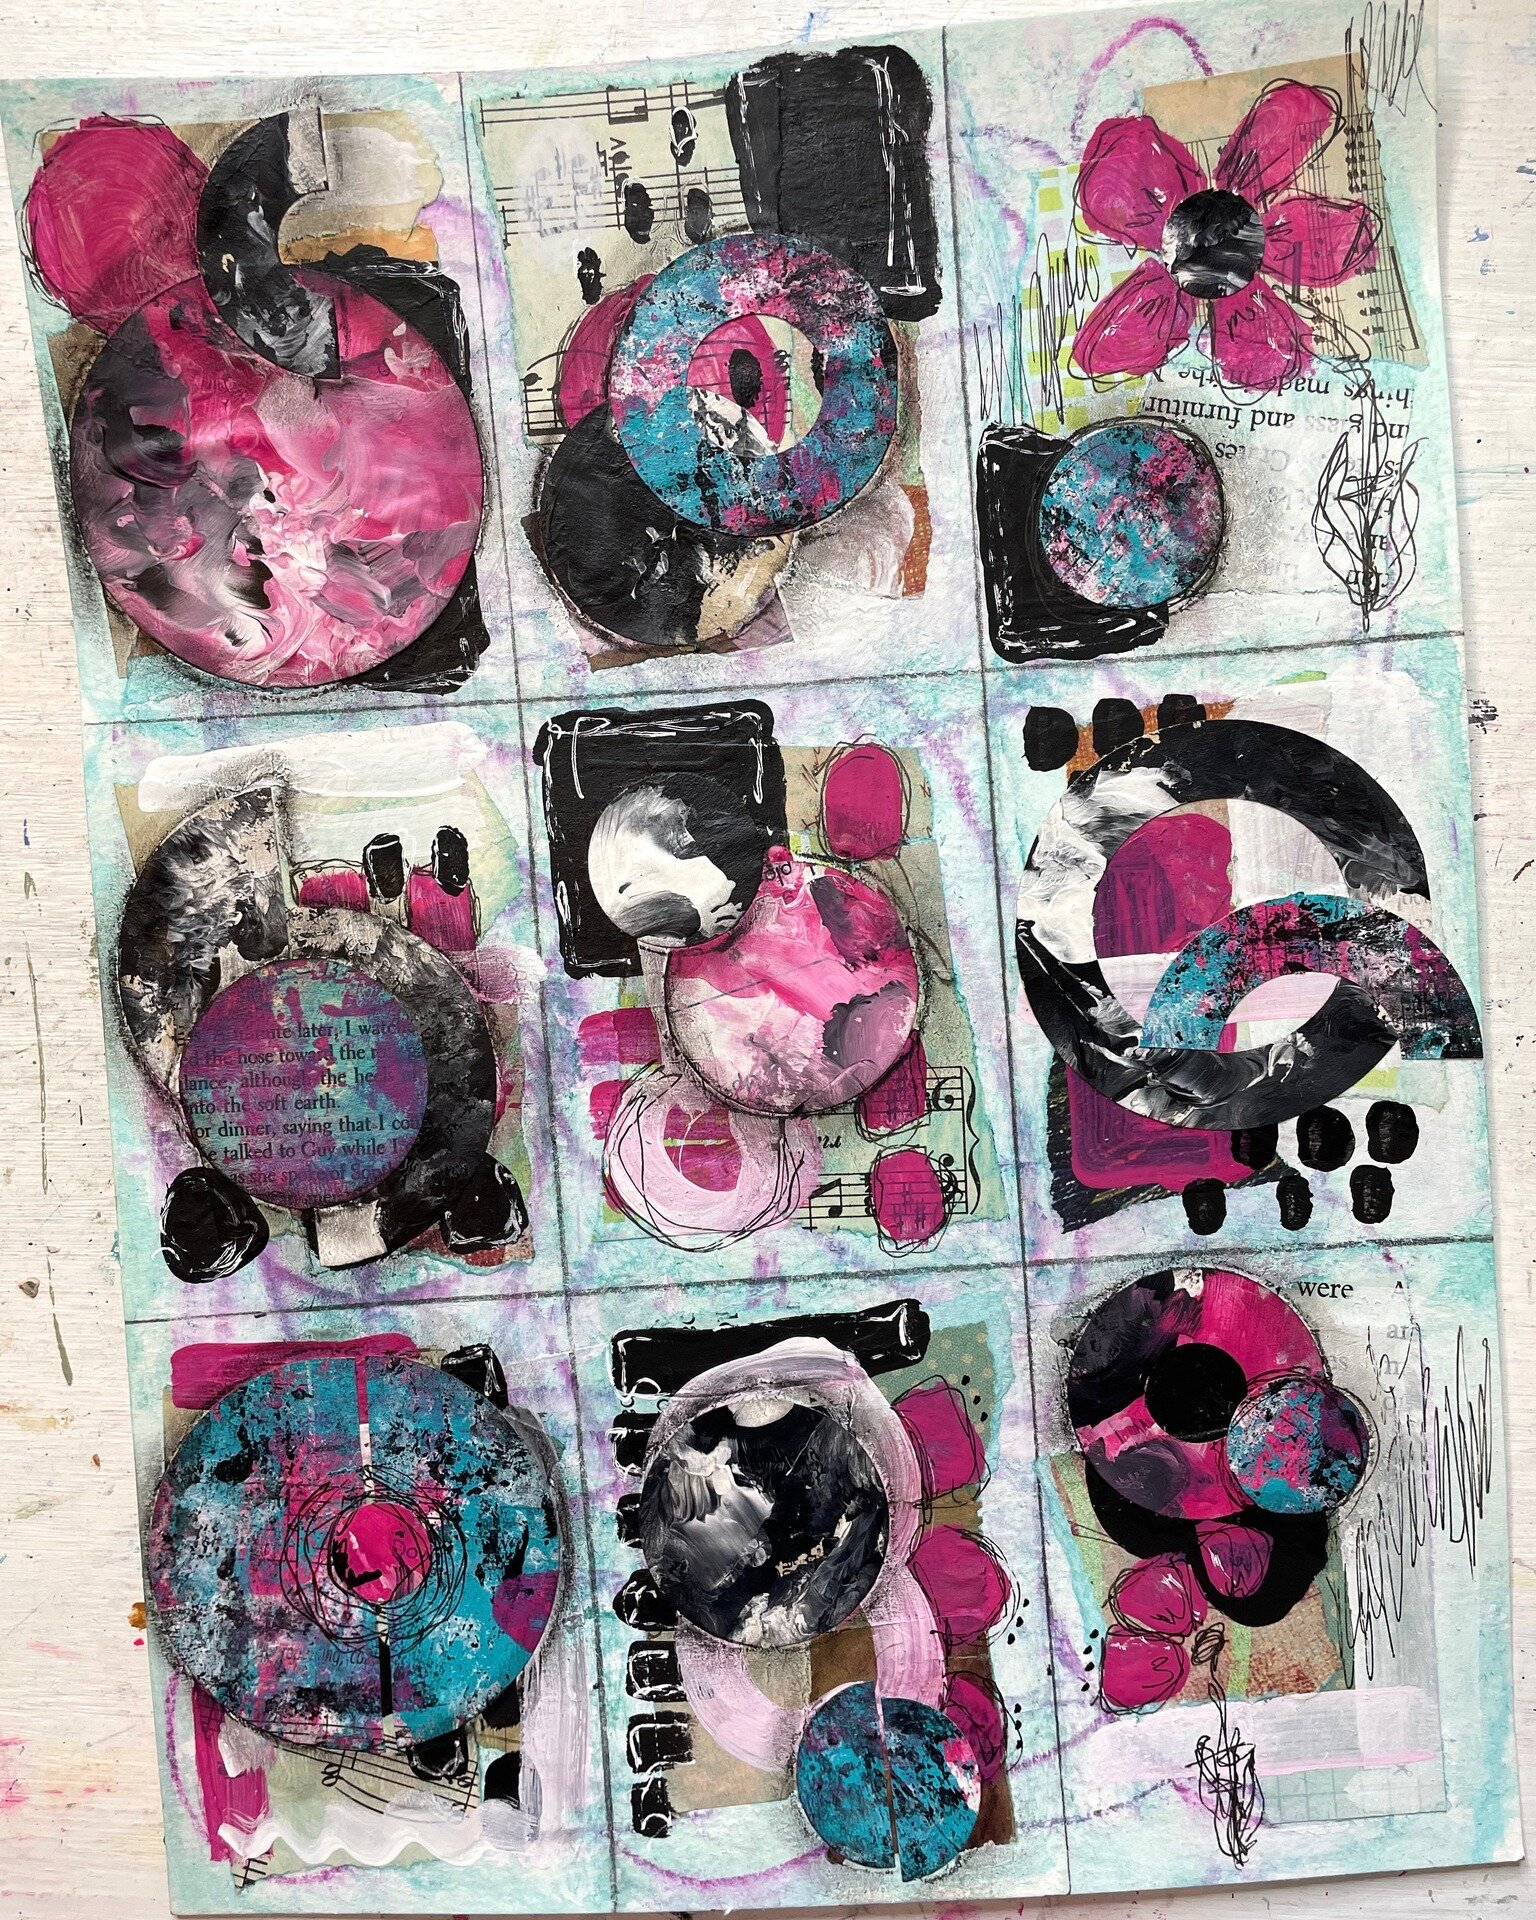 Created this from Jana Freeman's lesson in One BADASS Art Journal 2023.  Creating in a series. This lesson was fun, challenging and creative.  I loved every moment of it.  Used Inktense, acrylics, collage, ink and pastels.  Do you ever create in a se